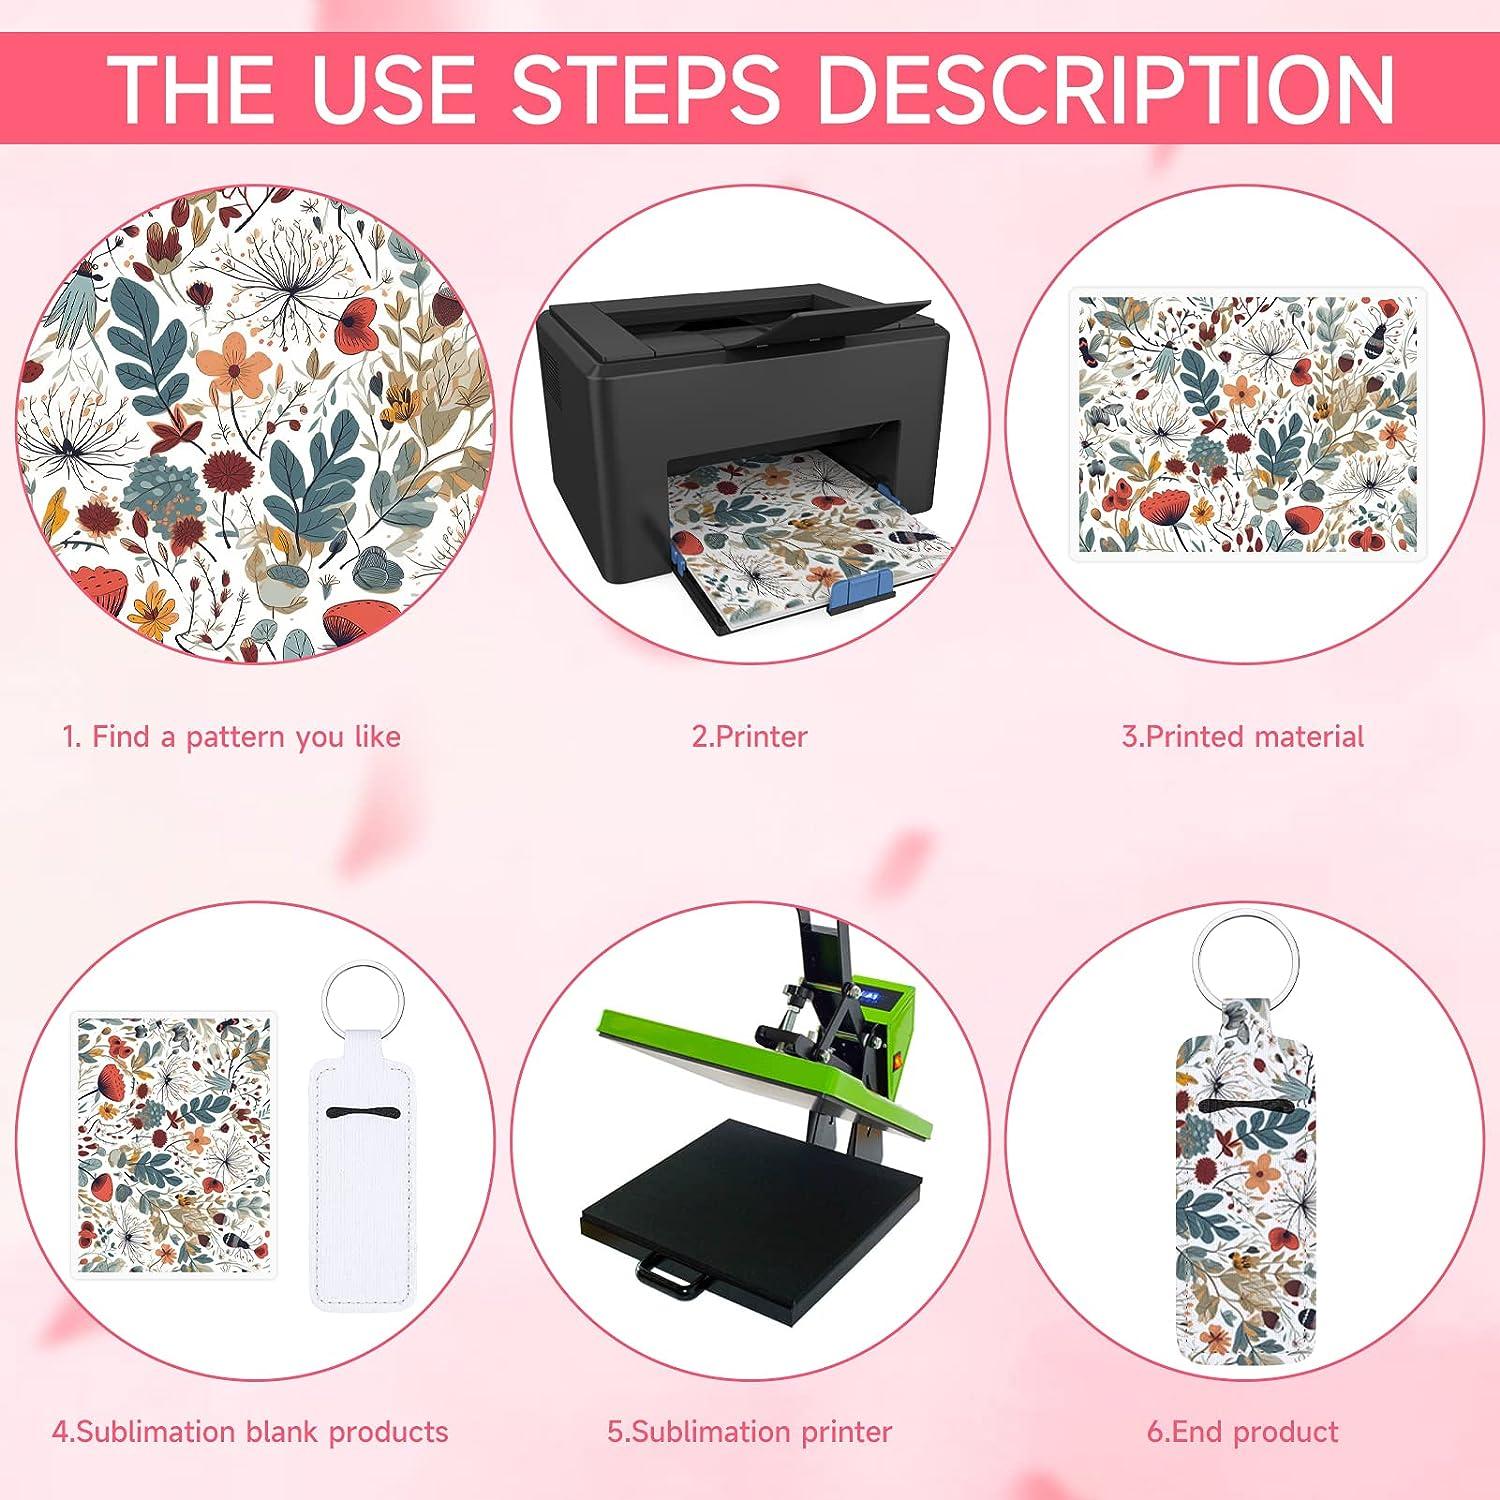  Patelai 72 Pieces Sublimation Blank Lipstick Holder Keychains  Set Includes 24 Neoprene White Lip Holder Keychains 24 Metal Clip Colorful  24 Tassel Pendants for Heat Press Transfer DIY Gifts : Arts, Crafts & Sewing